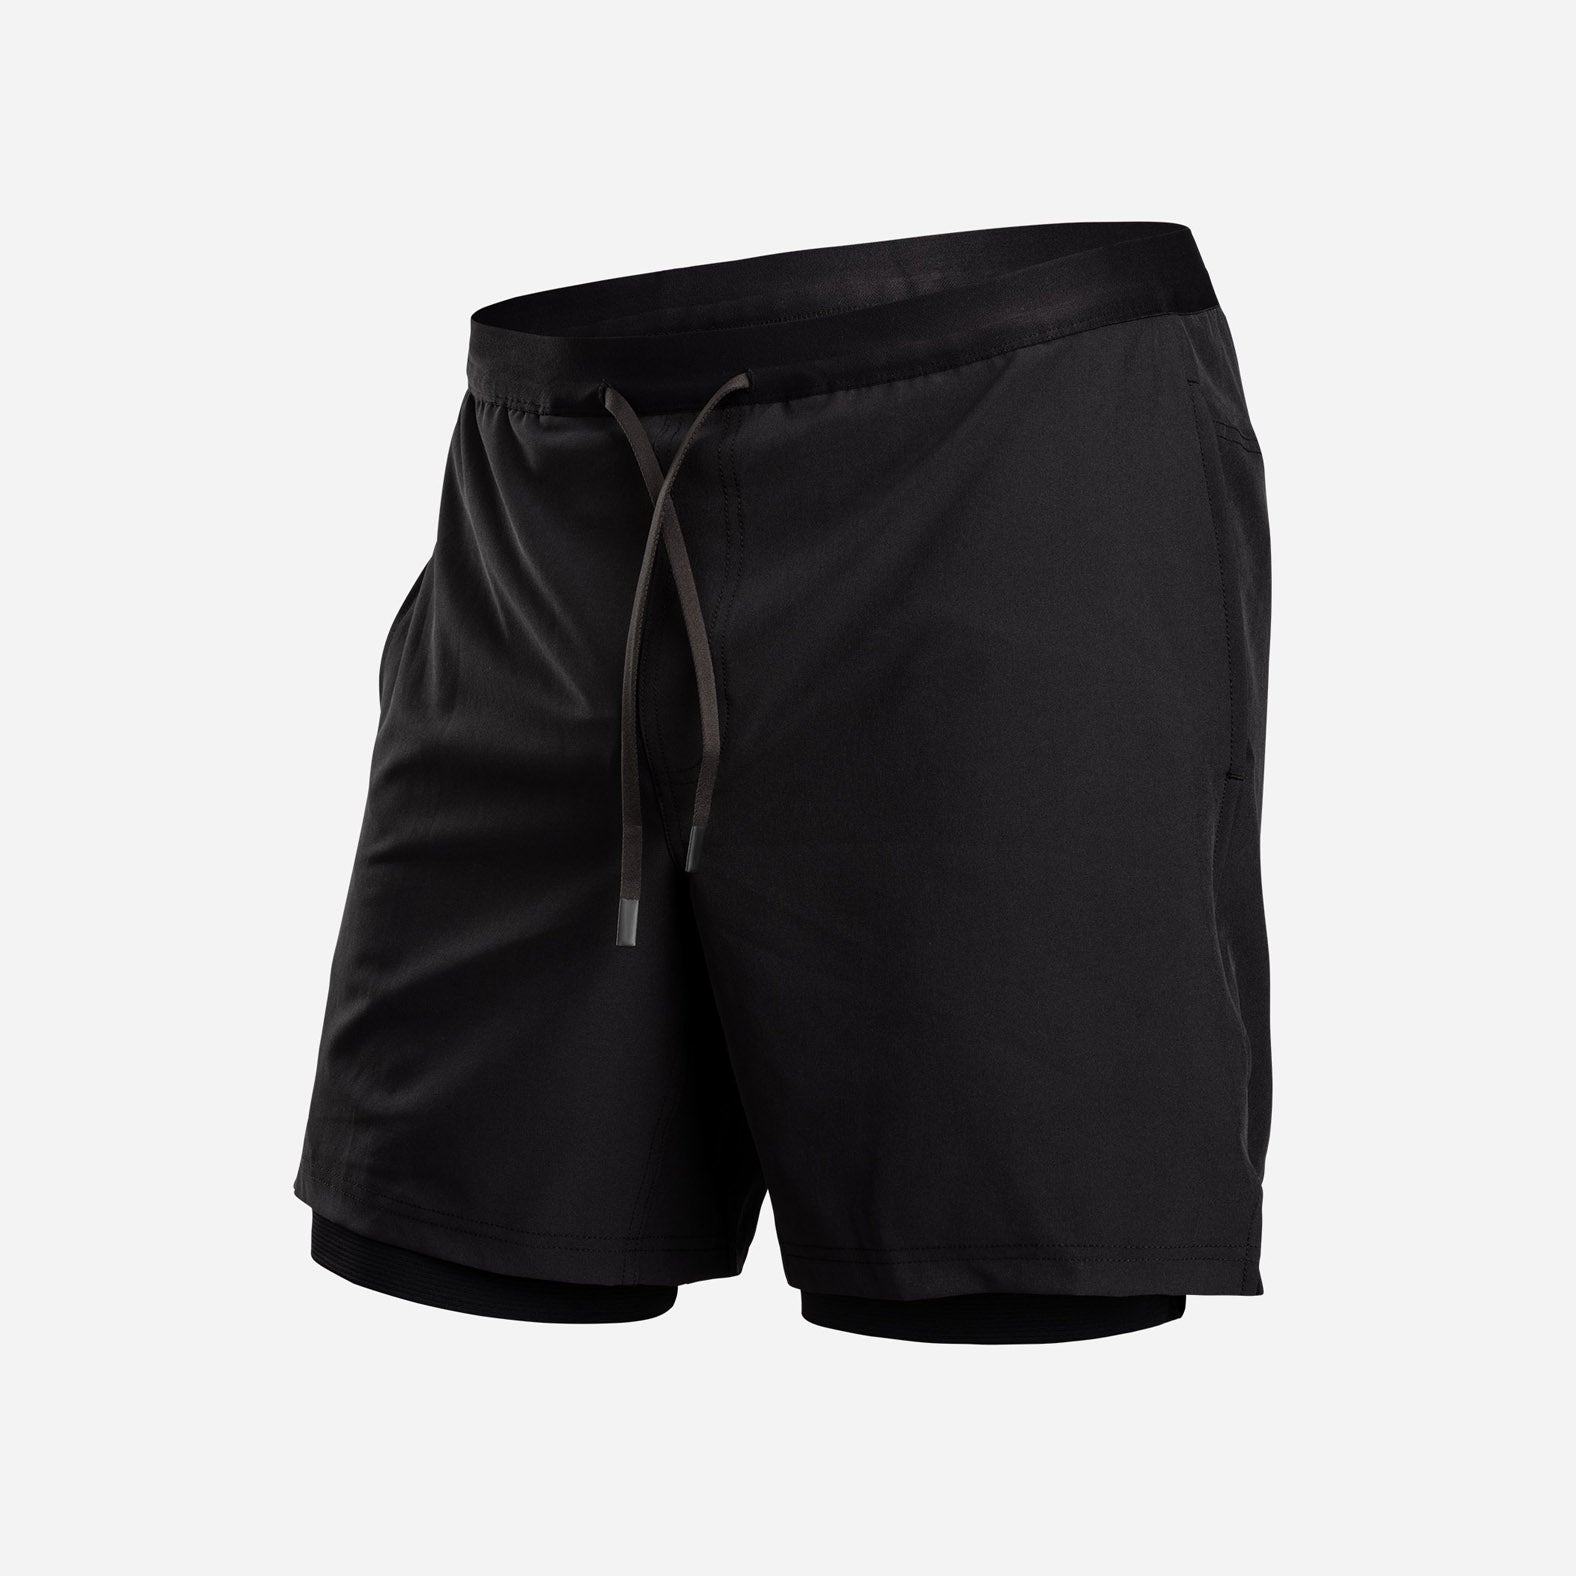  BN3TH Premium Men's 2 in 1 Athletic Shorts with Built